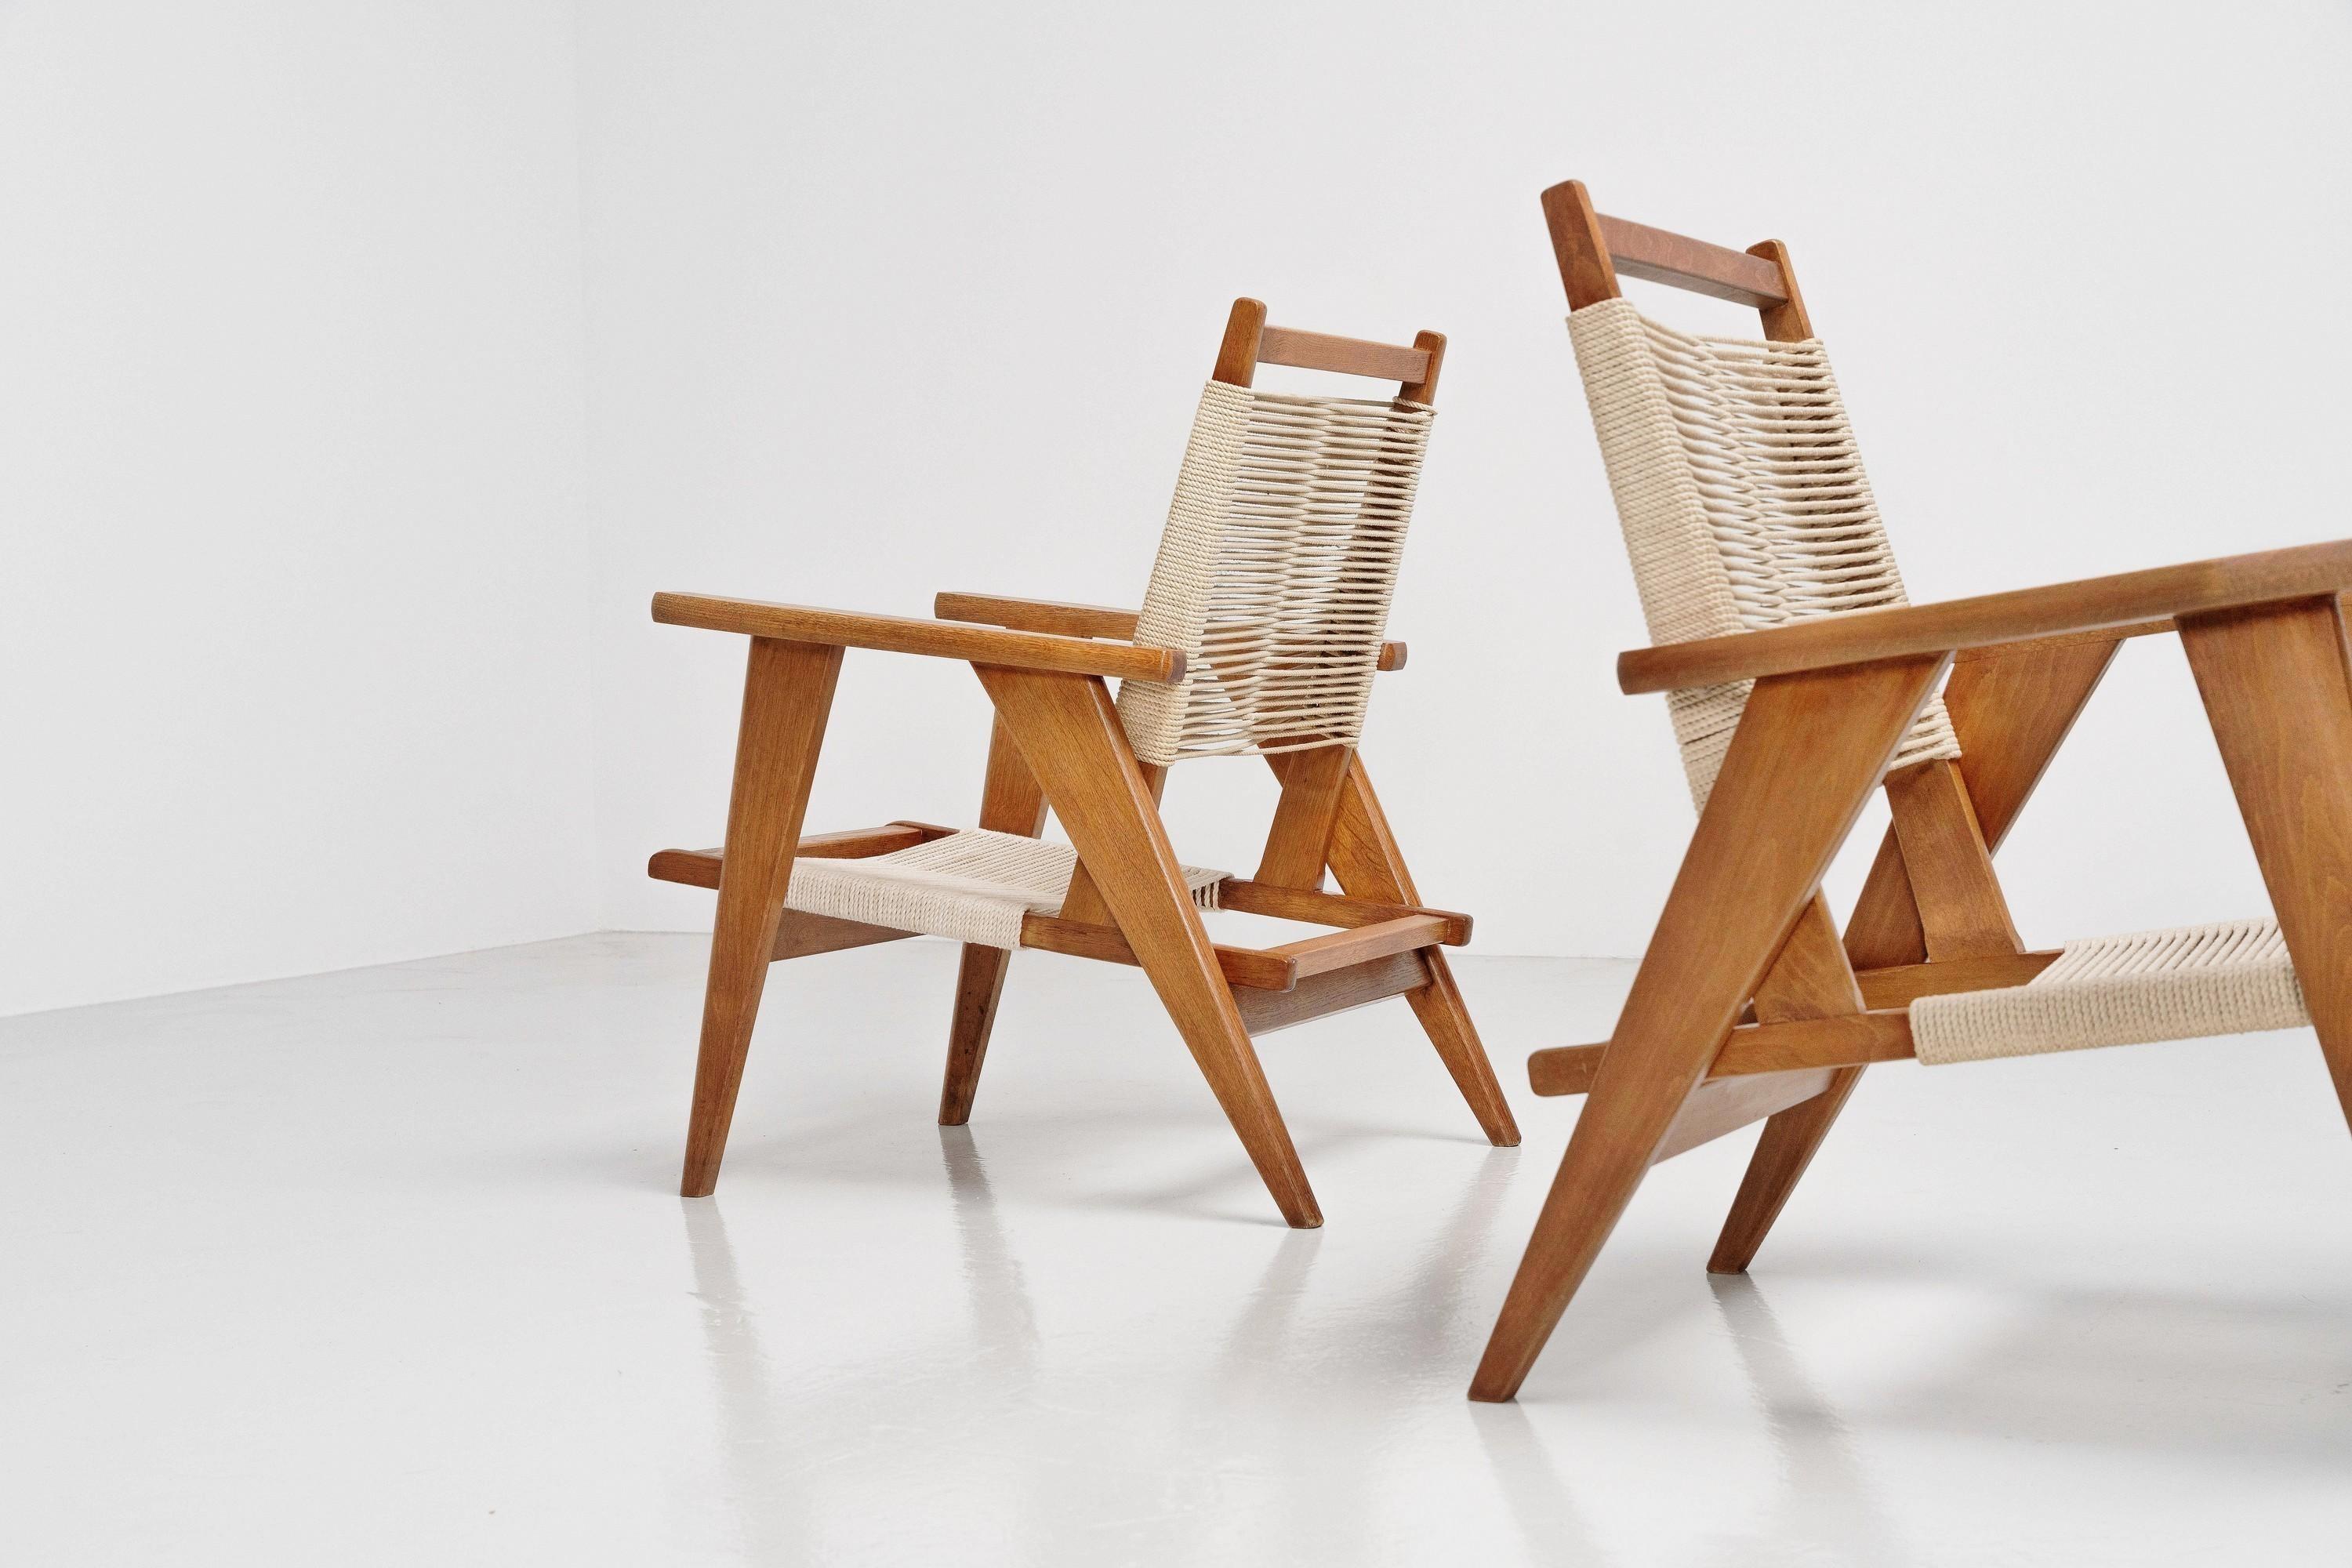 Very curious and nice pair of French lounge chairs in Oak wood with woven ropes for seating made in France in the 1950s. We could not determin their maker, but these chairs clearly resemble the spirit of French Avant-Gardism and Modernism, and